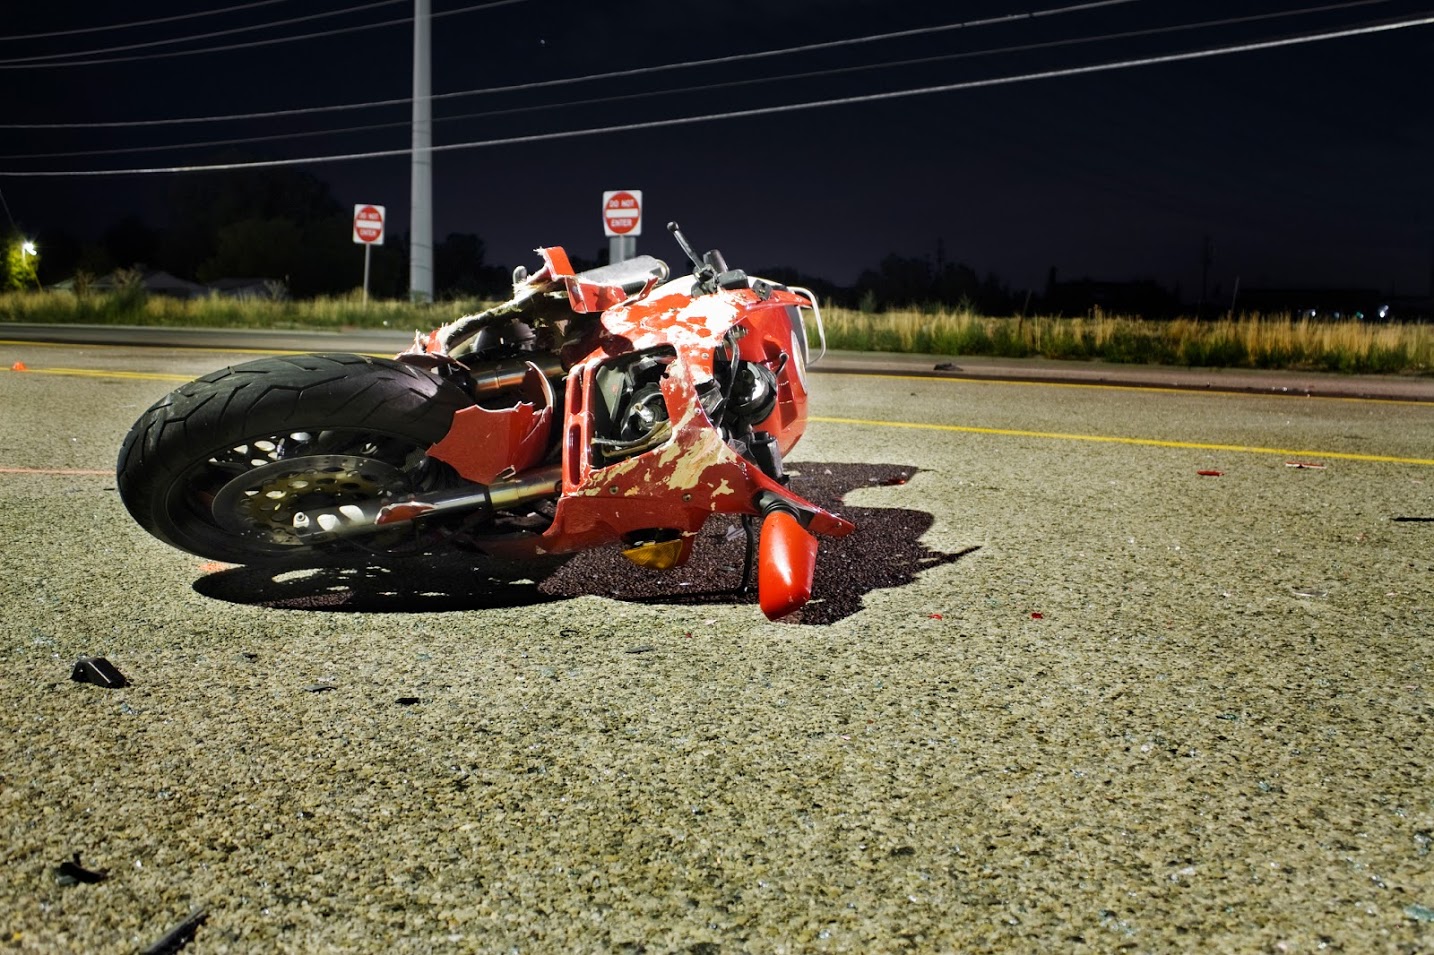 Motorcycle Accident Lawyer Discusses Midwest City Crash